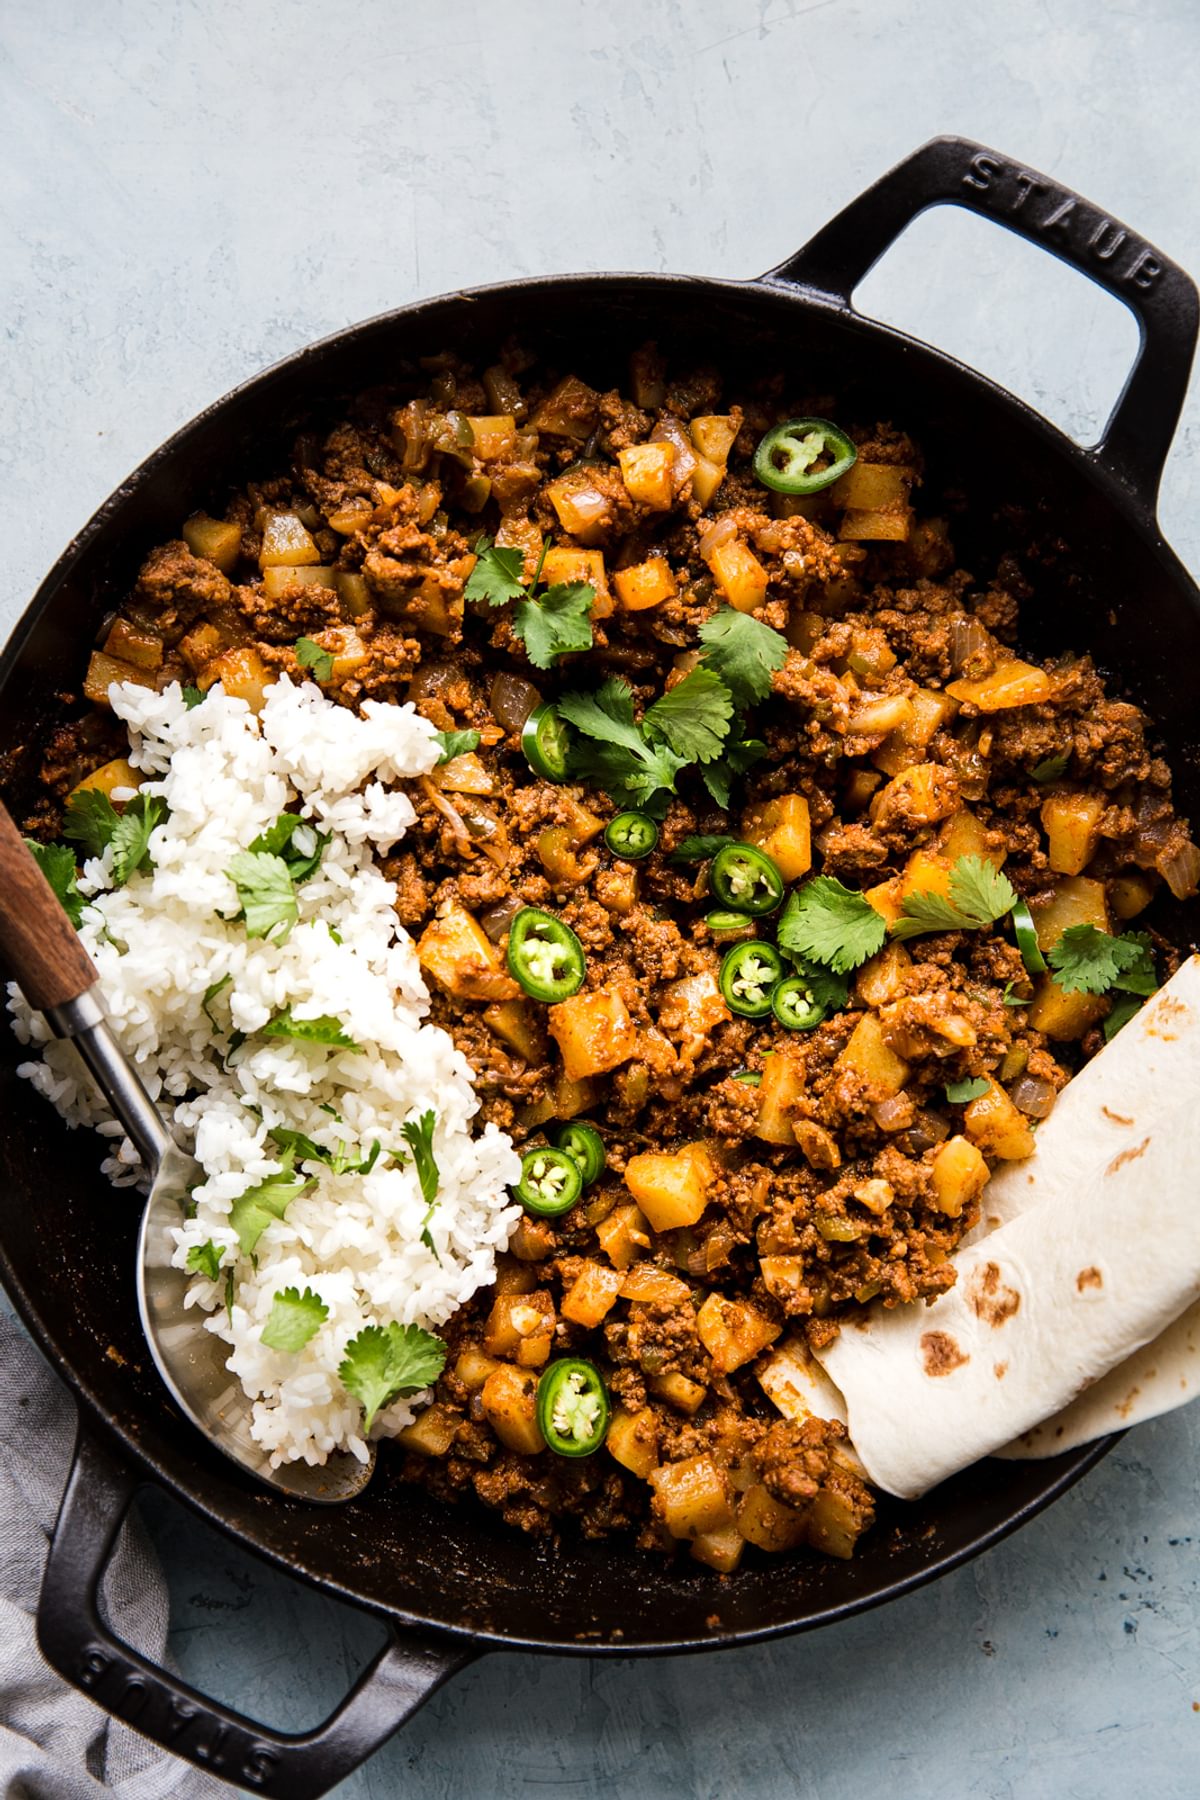 Mexican picadillo in a skillet with ground beef, potatoes, onion, cumin, tomato paste and spices. Served with rice